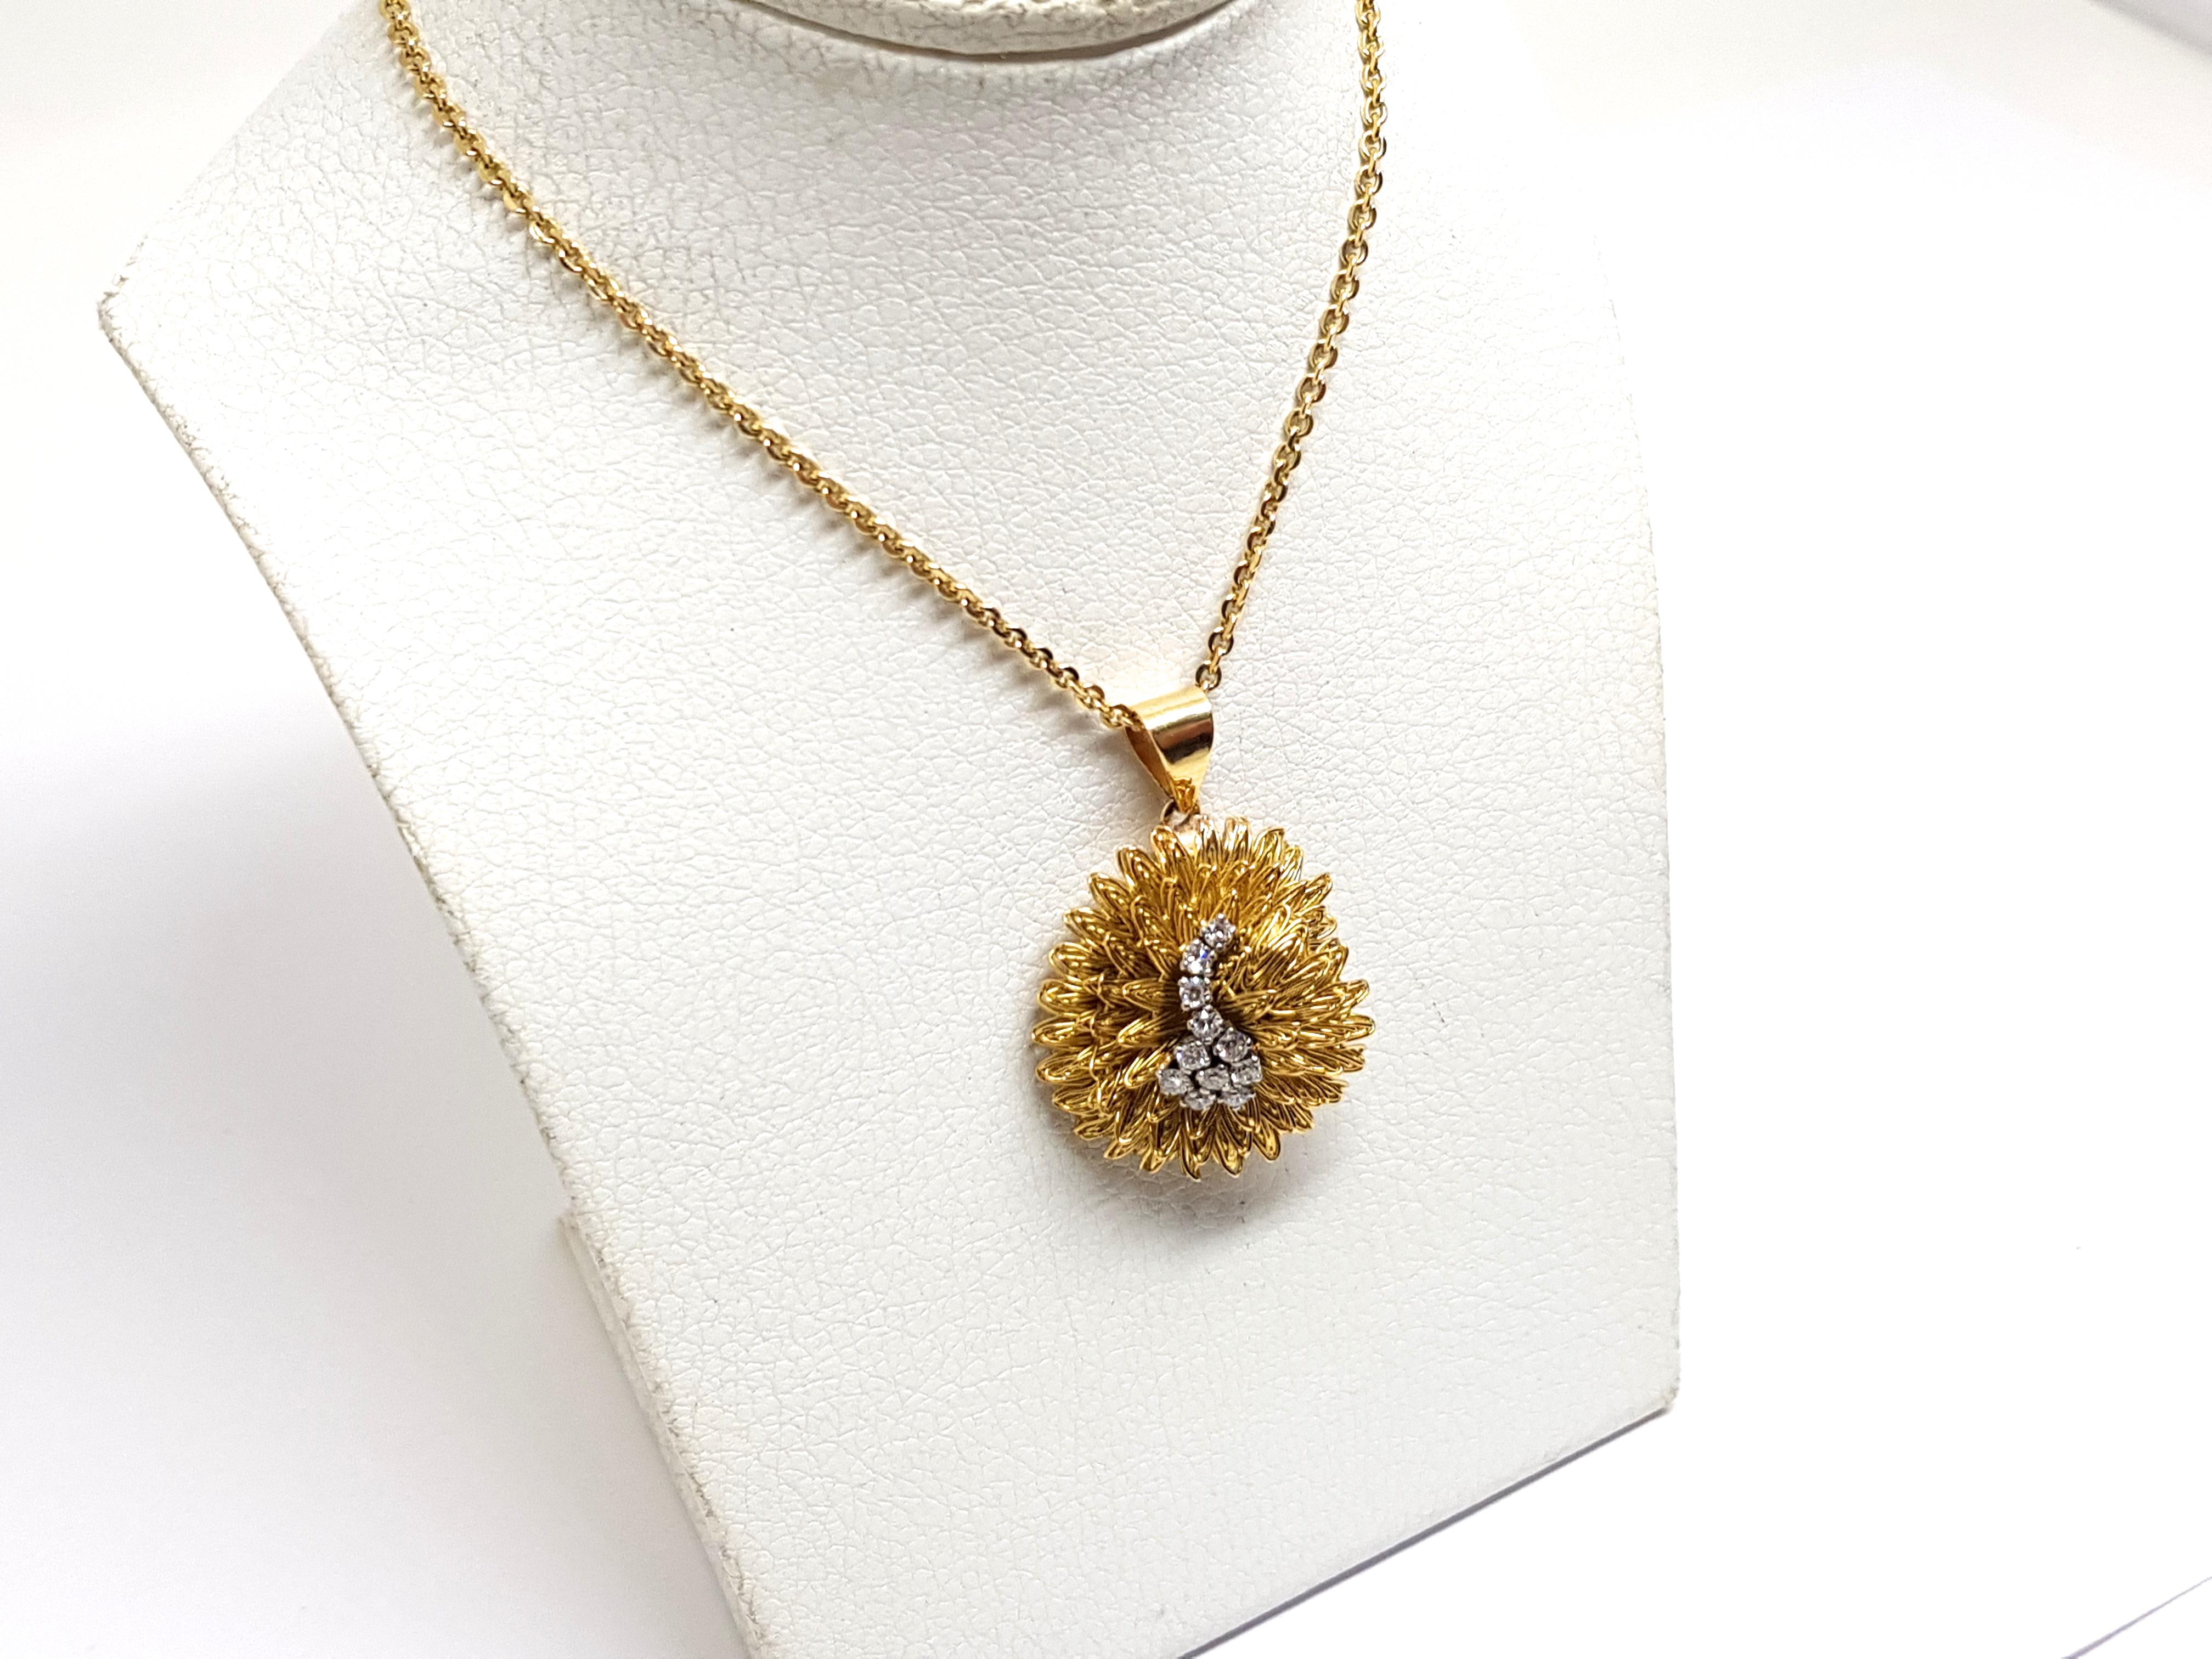 Gold: 18 Karat Yellow & White Gold 
Weight: 14.07 grams.
Diamonds: 0.43 ct. Color: F clarity: VS
Length Necklace: choose between 15, 16.5, 17.7 or 19.6cm.
Length Pendant: 1.10 Inches.
Width Pendant: 0.90 inches.
All our jewellery comes with a